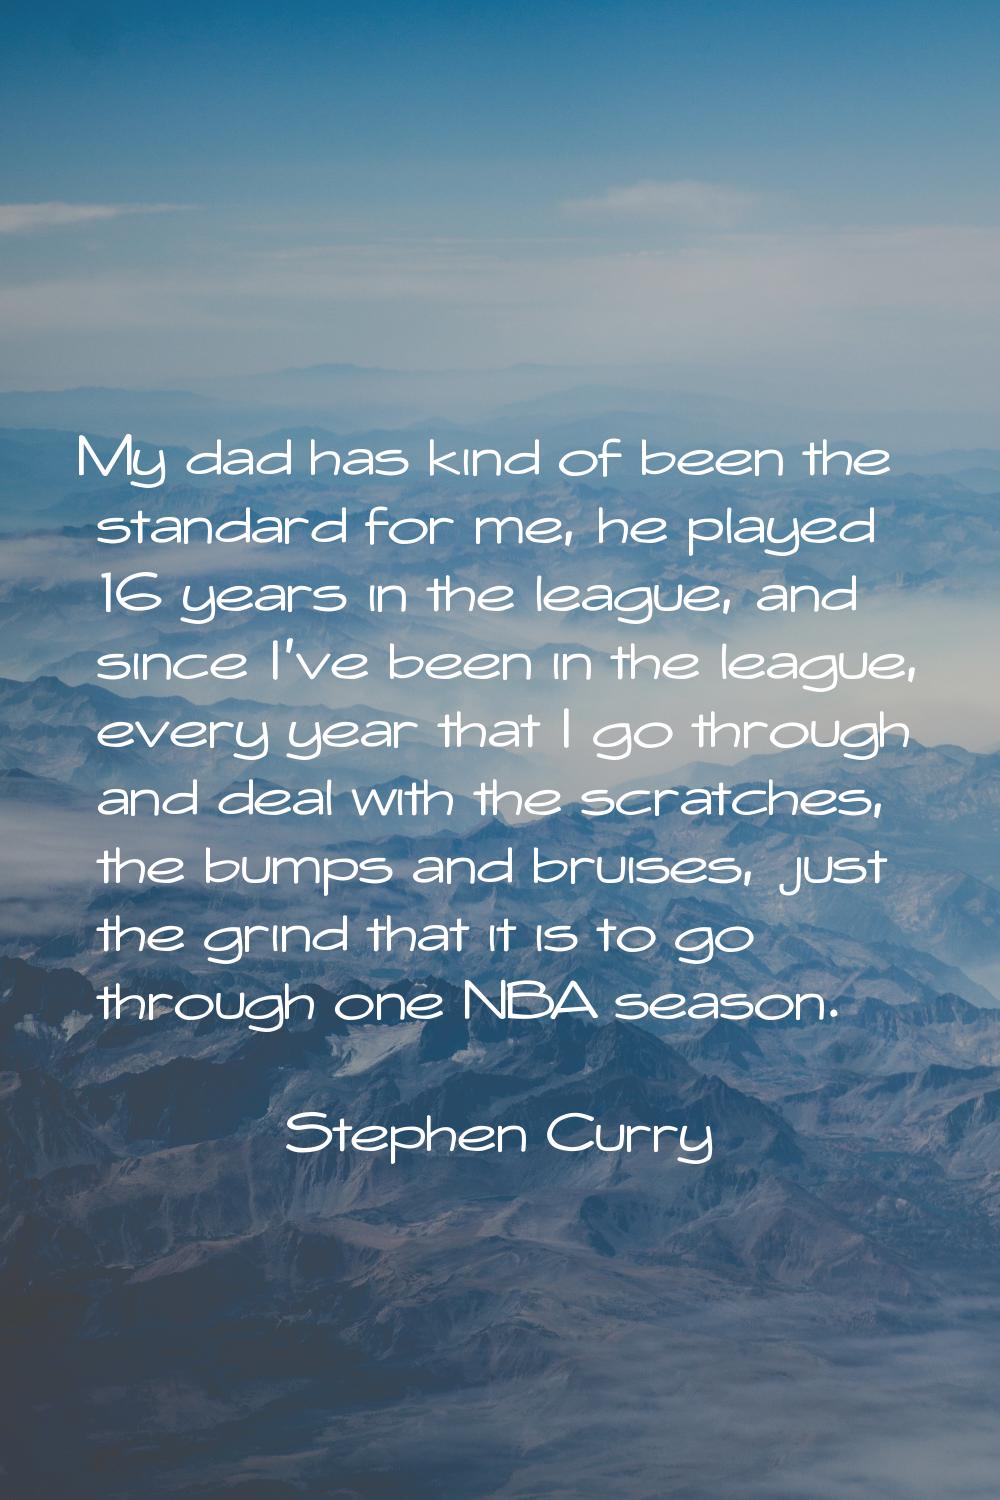 My dad has kind of been the standard for me, he played 16 years in the league, and since I've been 